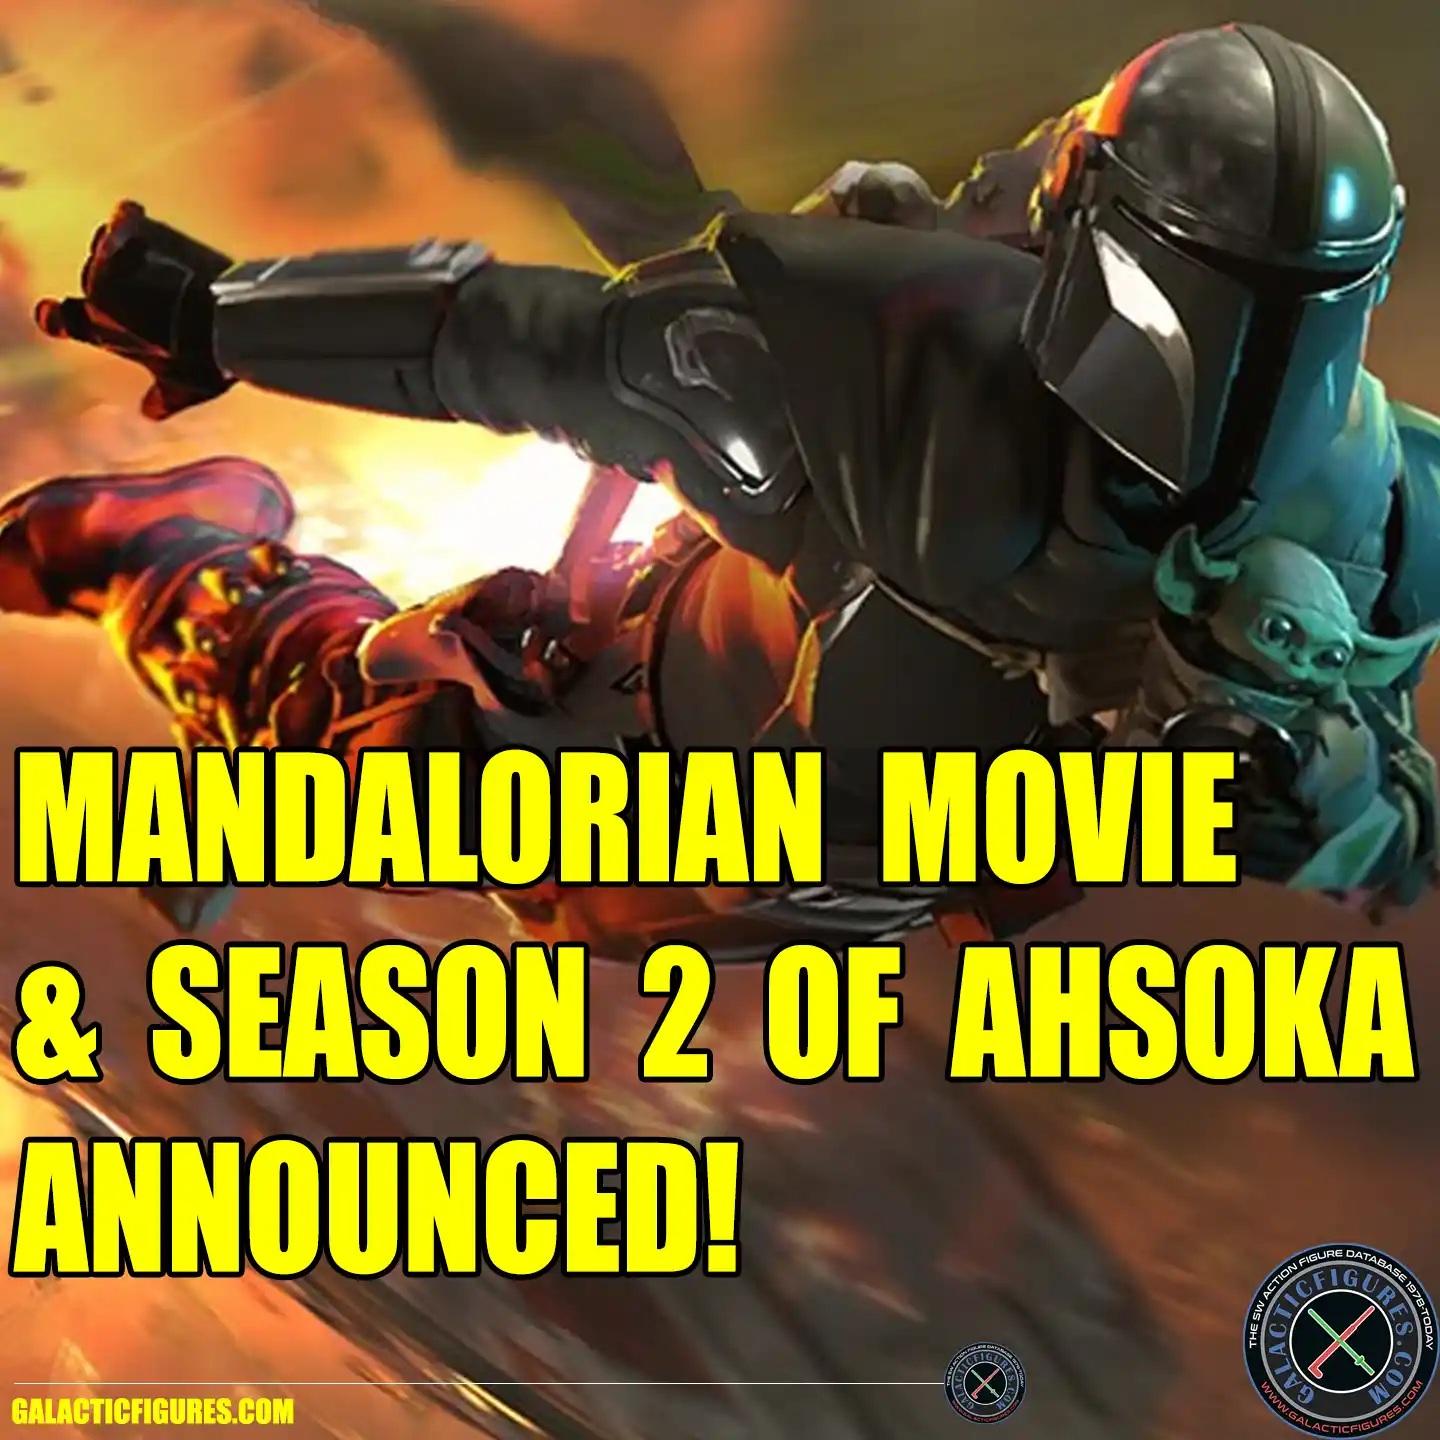 The Mandalorian and Grogu Set to Conquer the Big Screen, While Ahsoka Will Get A Second Season